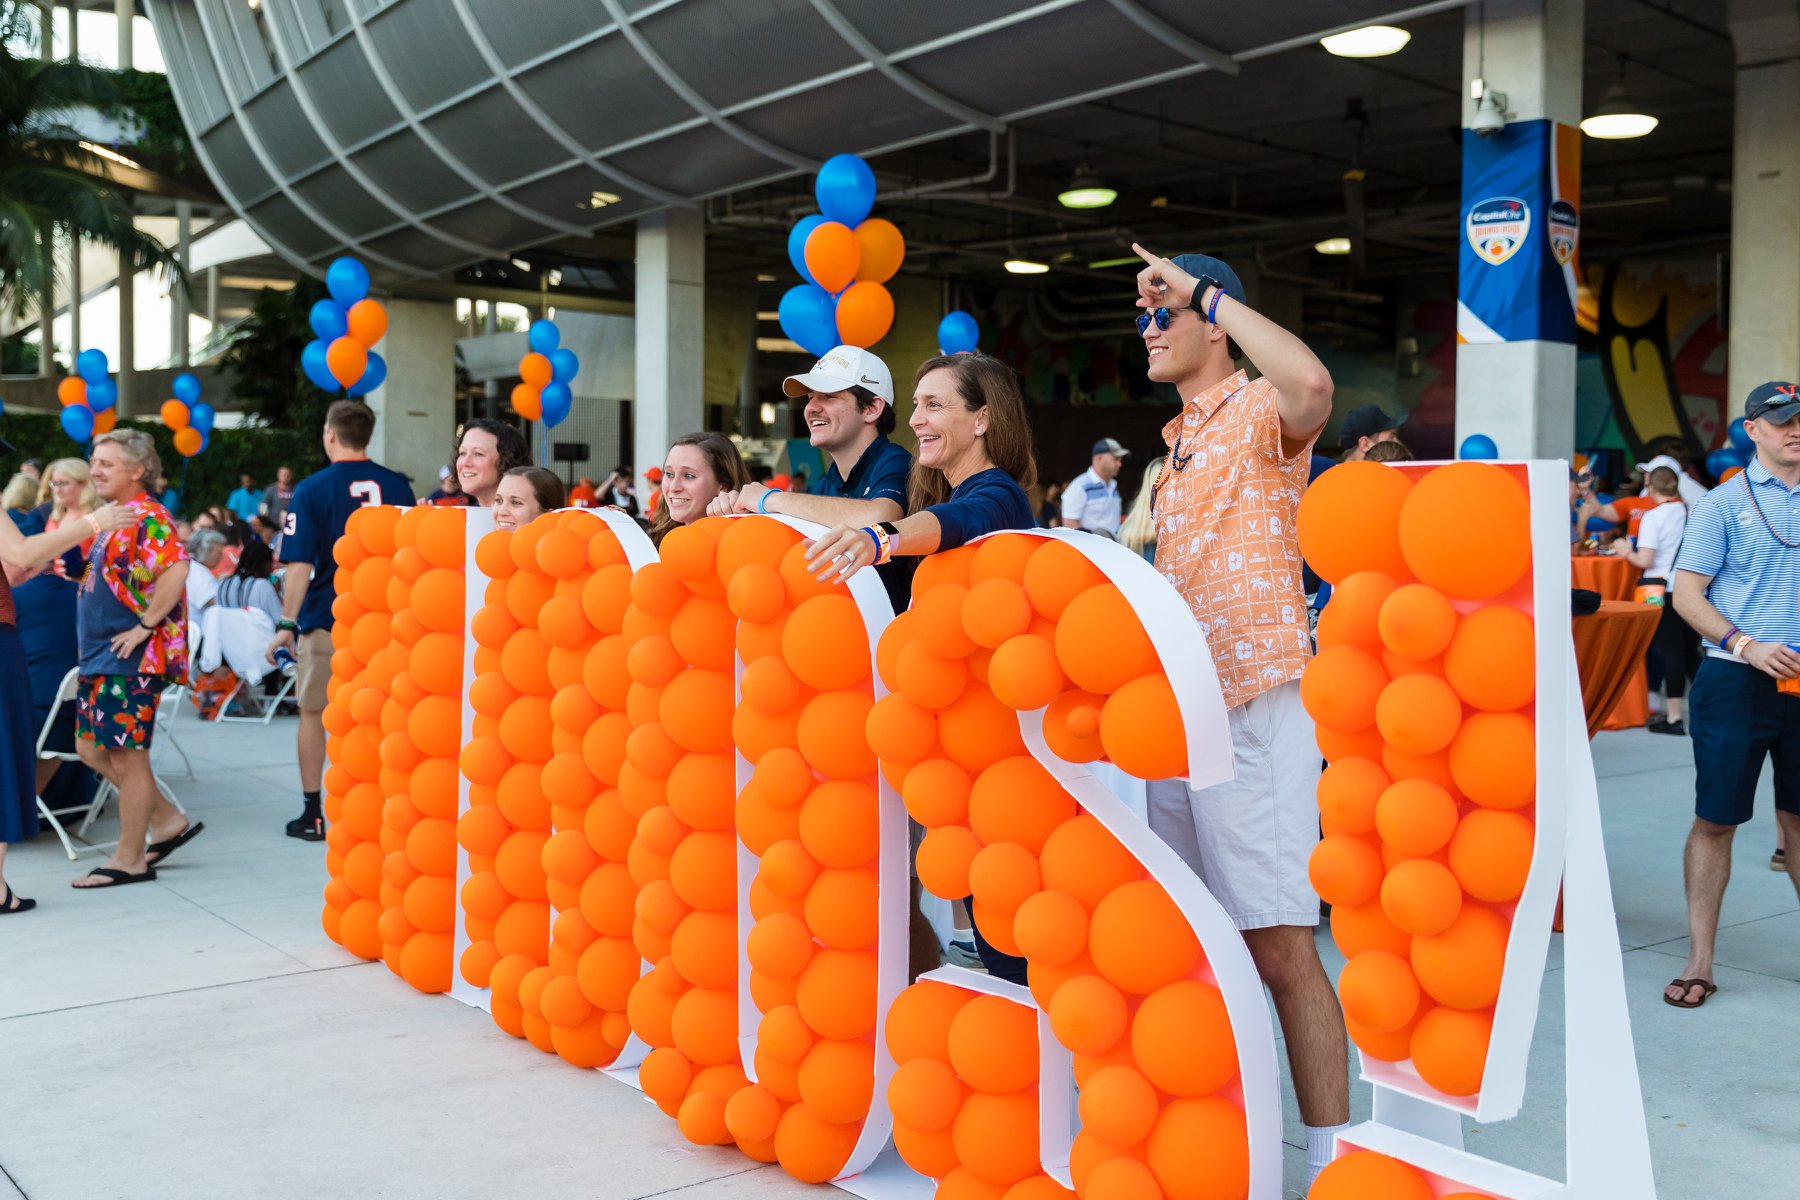 Hoos standing behind a balloon structure that spells "HOOS"